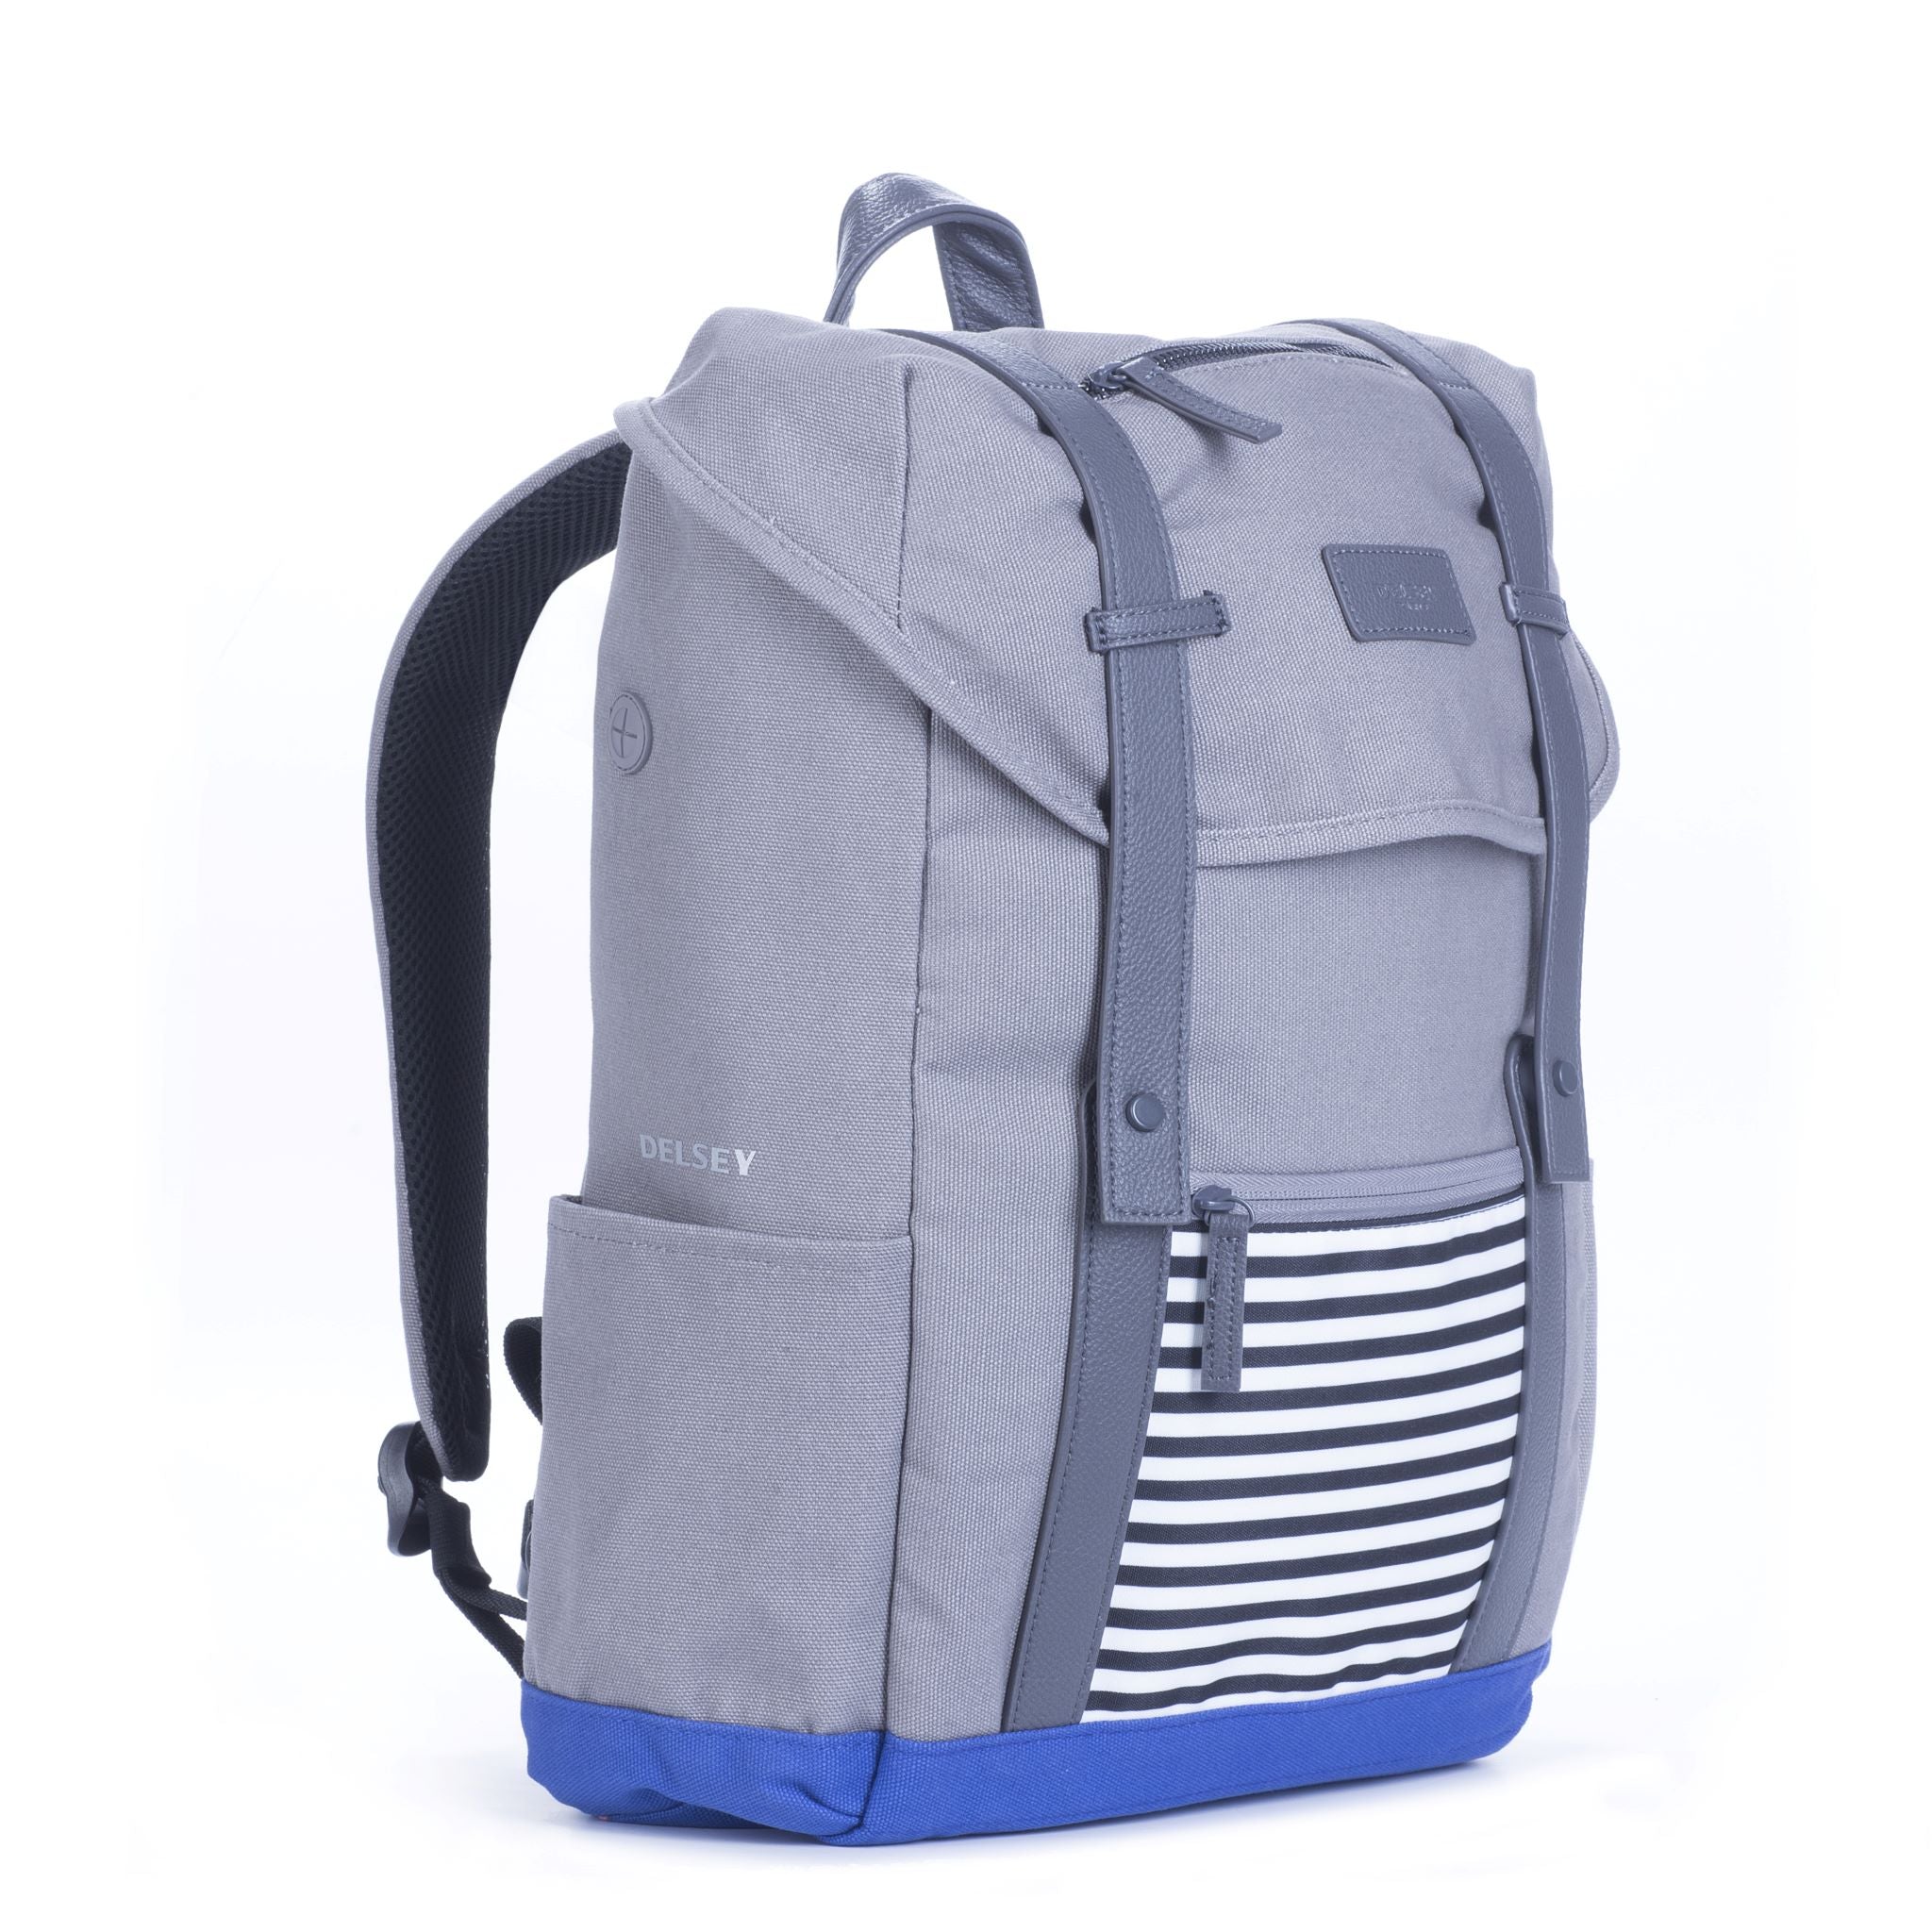 ARDENT Backpack